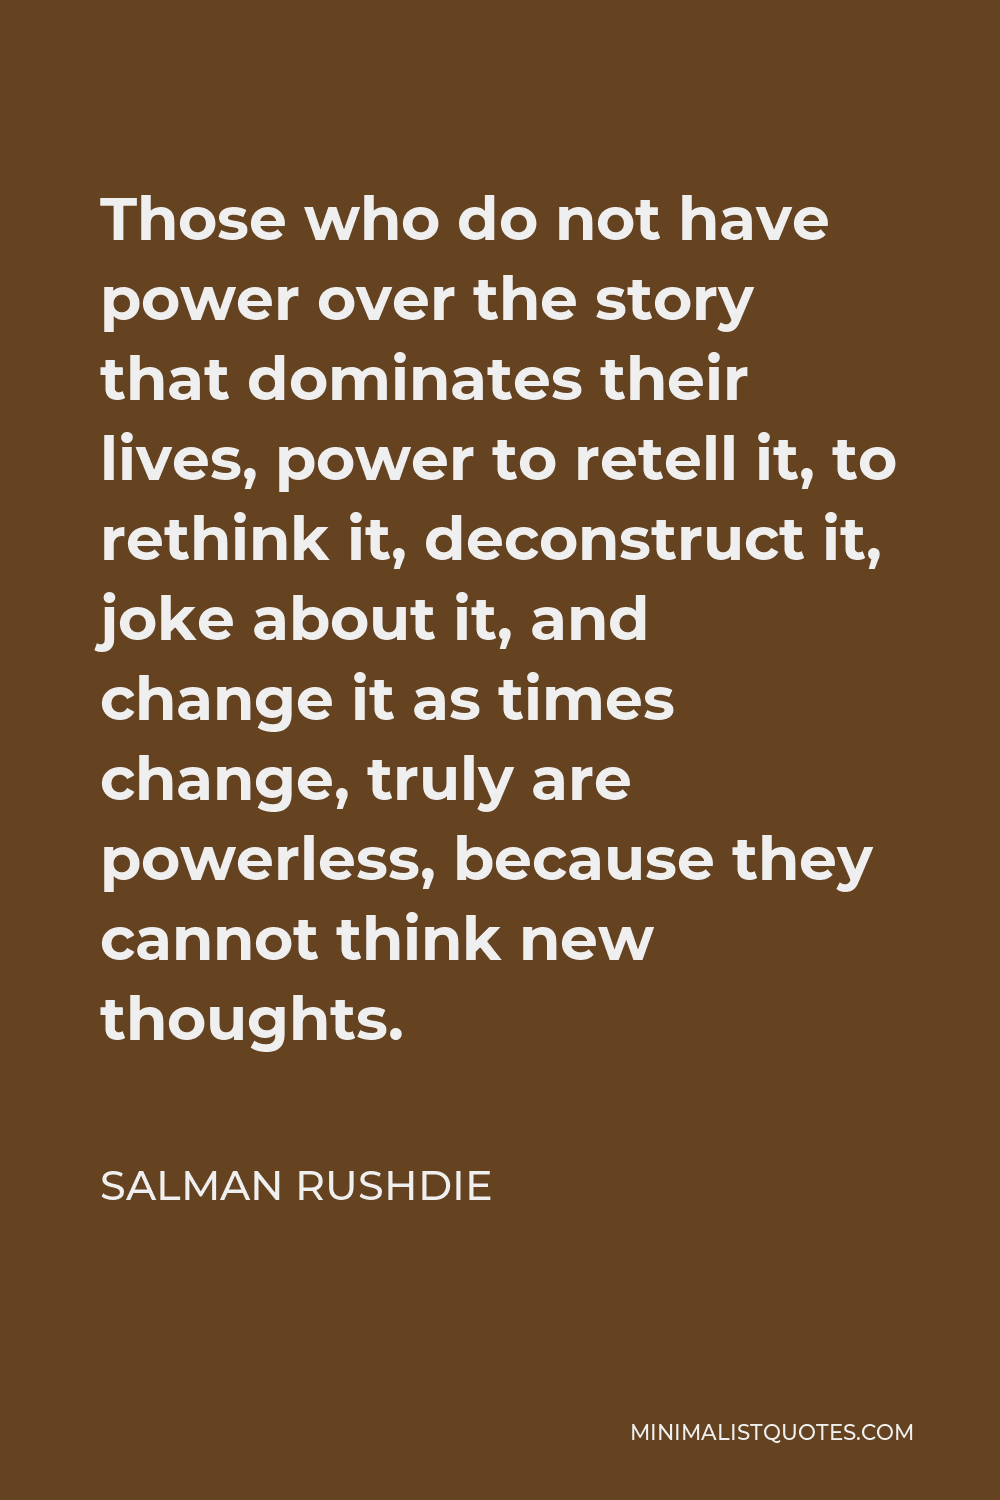 Salman Rushdie Quote - Those who do not have power over the story that dominates their lives, power to retell it, to rethink it, deconstruct it, joke about it, and change it as times change, truly are powerless, because they cannot think new thoughts.